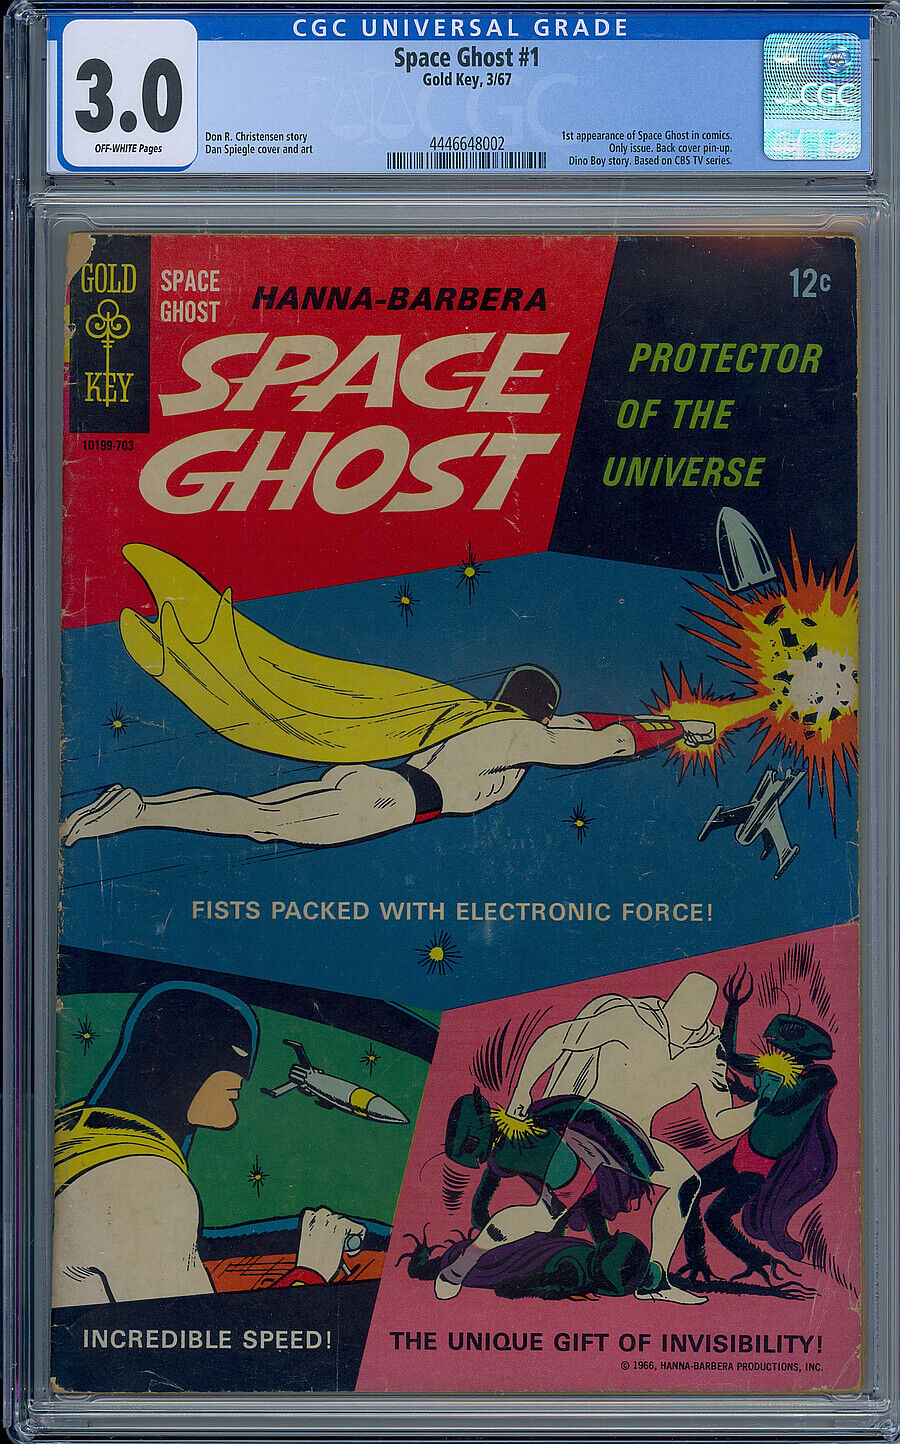 SPACE GHOST #1 CGC 3.0 GOLD KEY 1967 1ST APPEARANCE